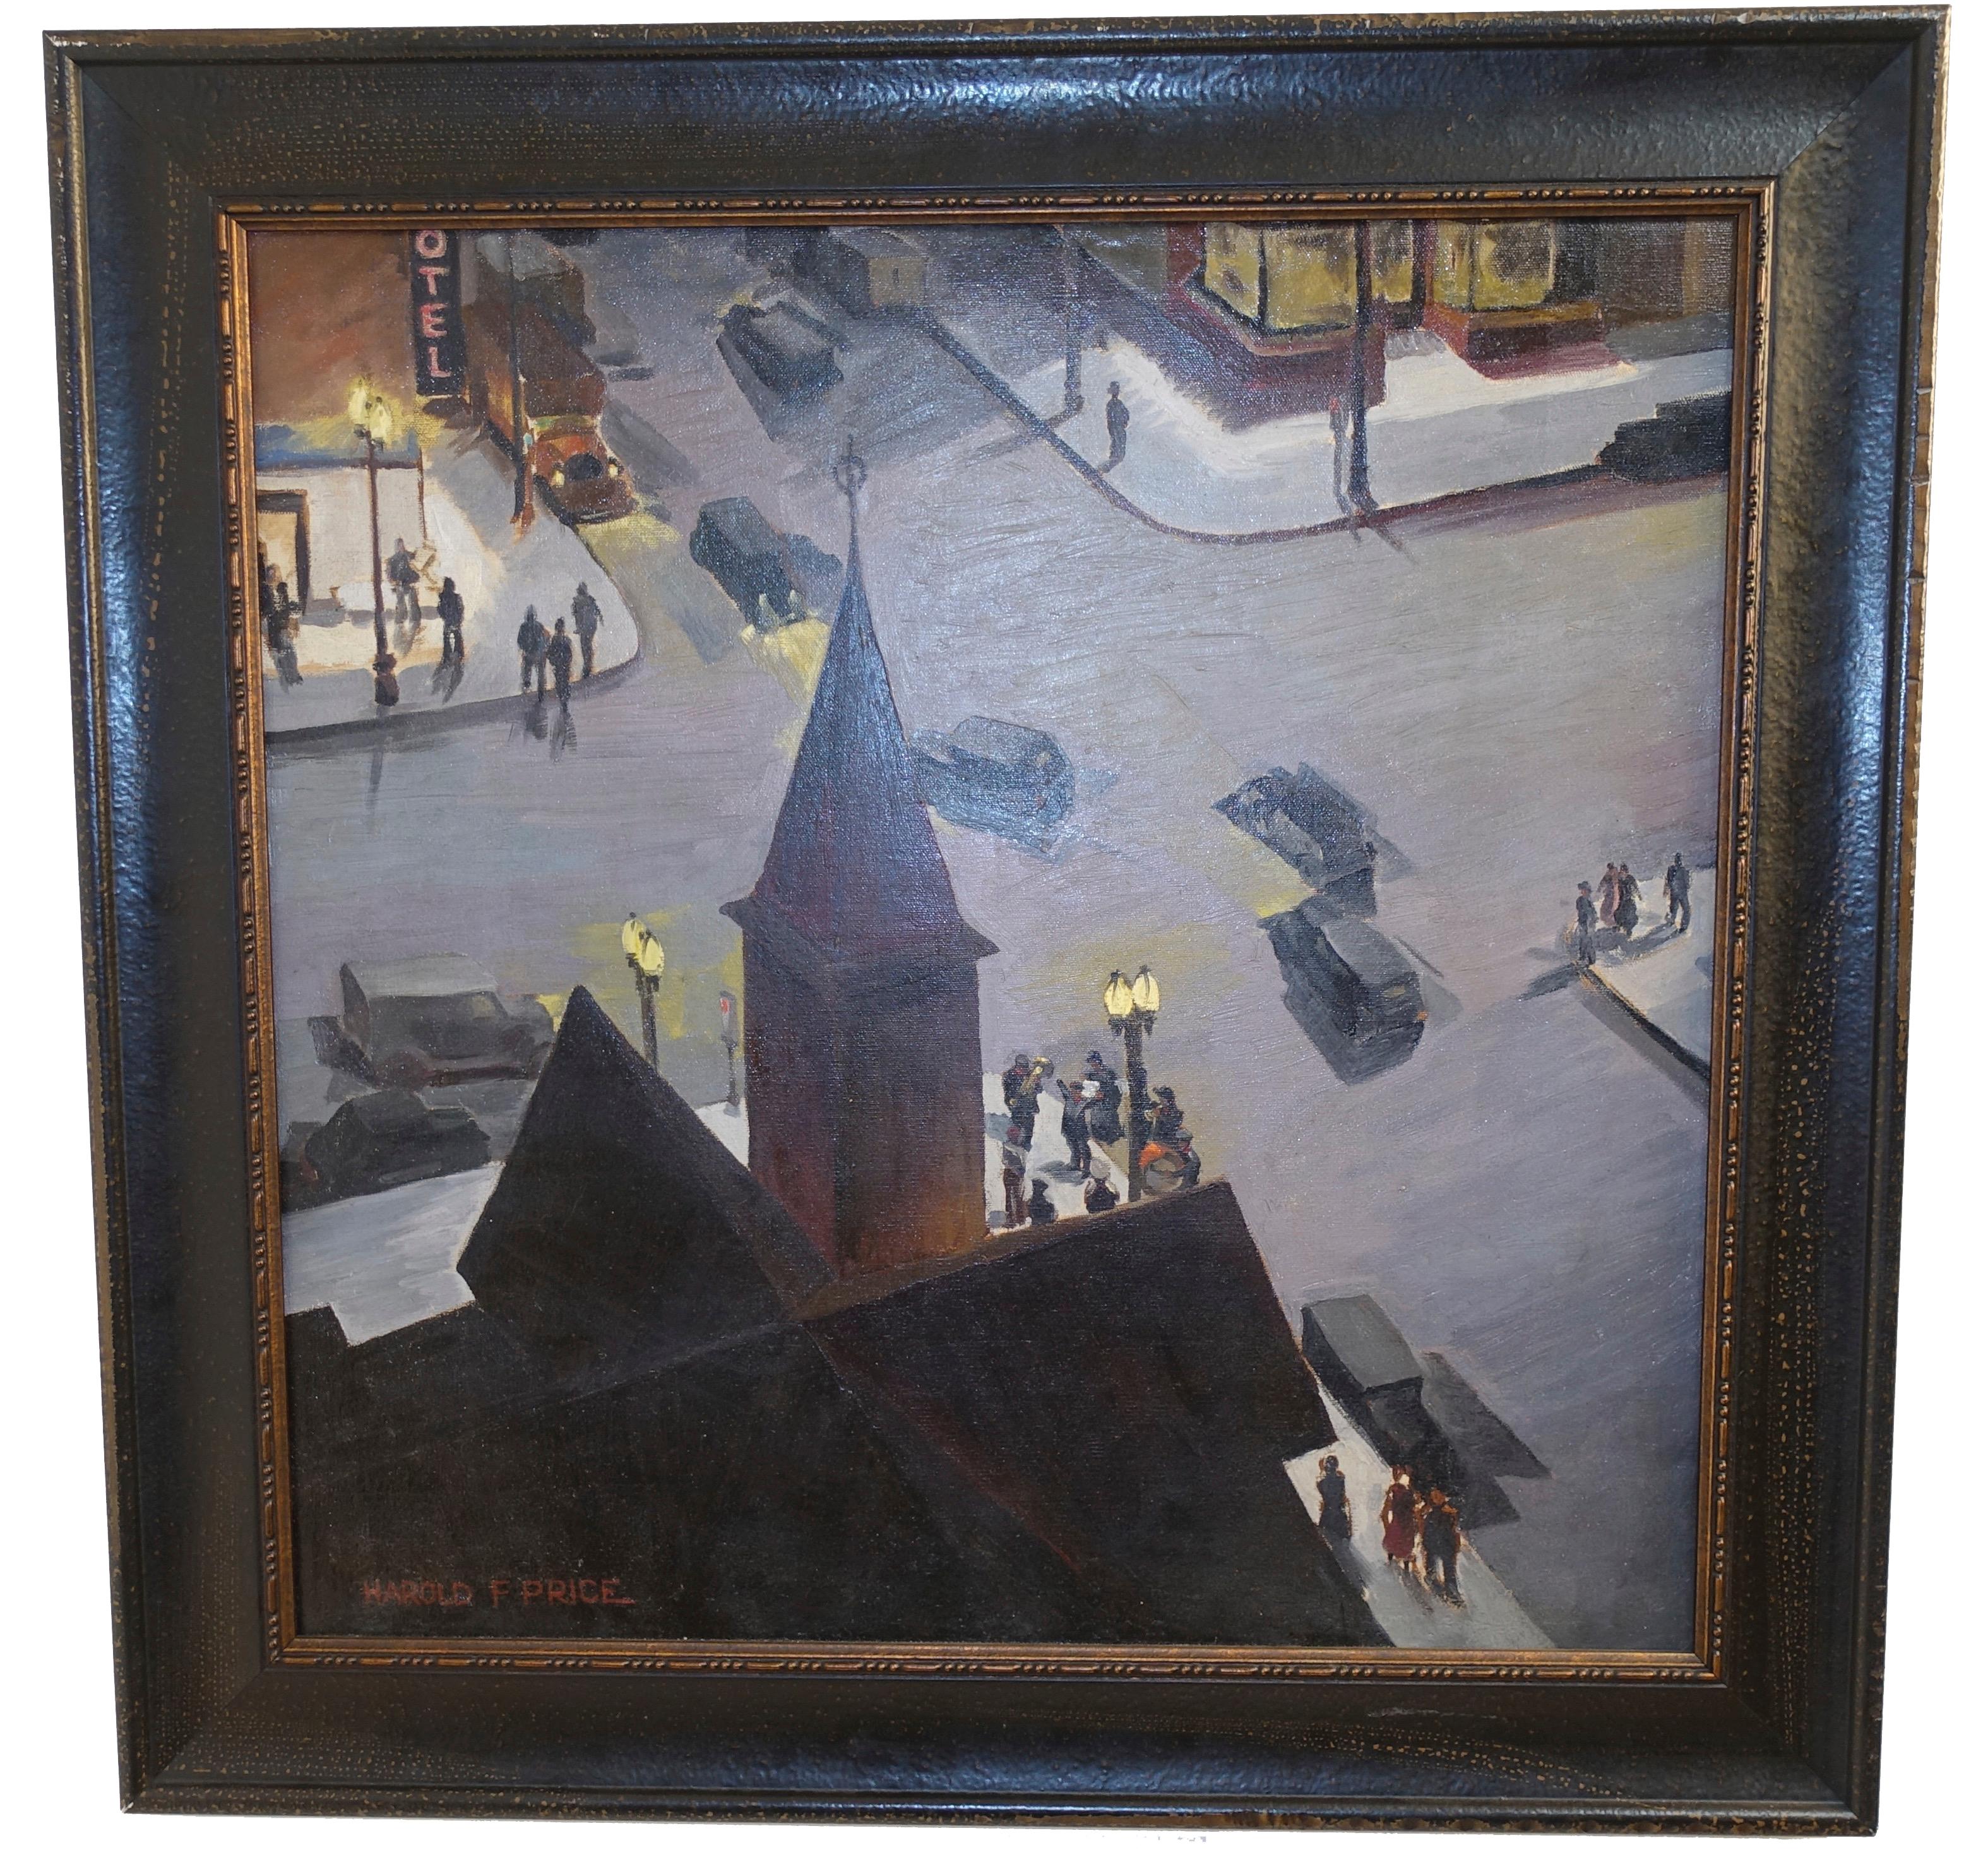 Bird's-eye view of an urban intersection at dusk by artist Harold Price. Framed painting, oil on canvas, American, mid-20th century.


Born in Portland, OR on Oct. 13, 1912. After graduating from the University of Oregon, Price moved to Los